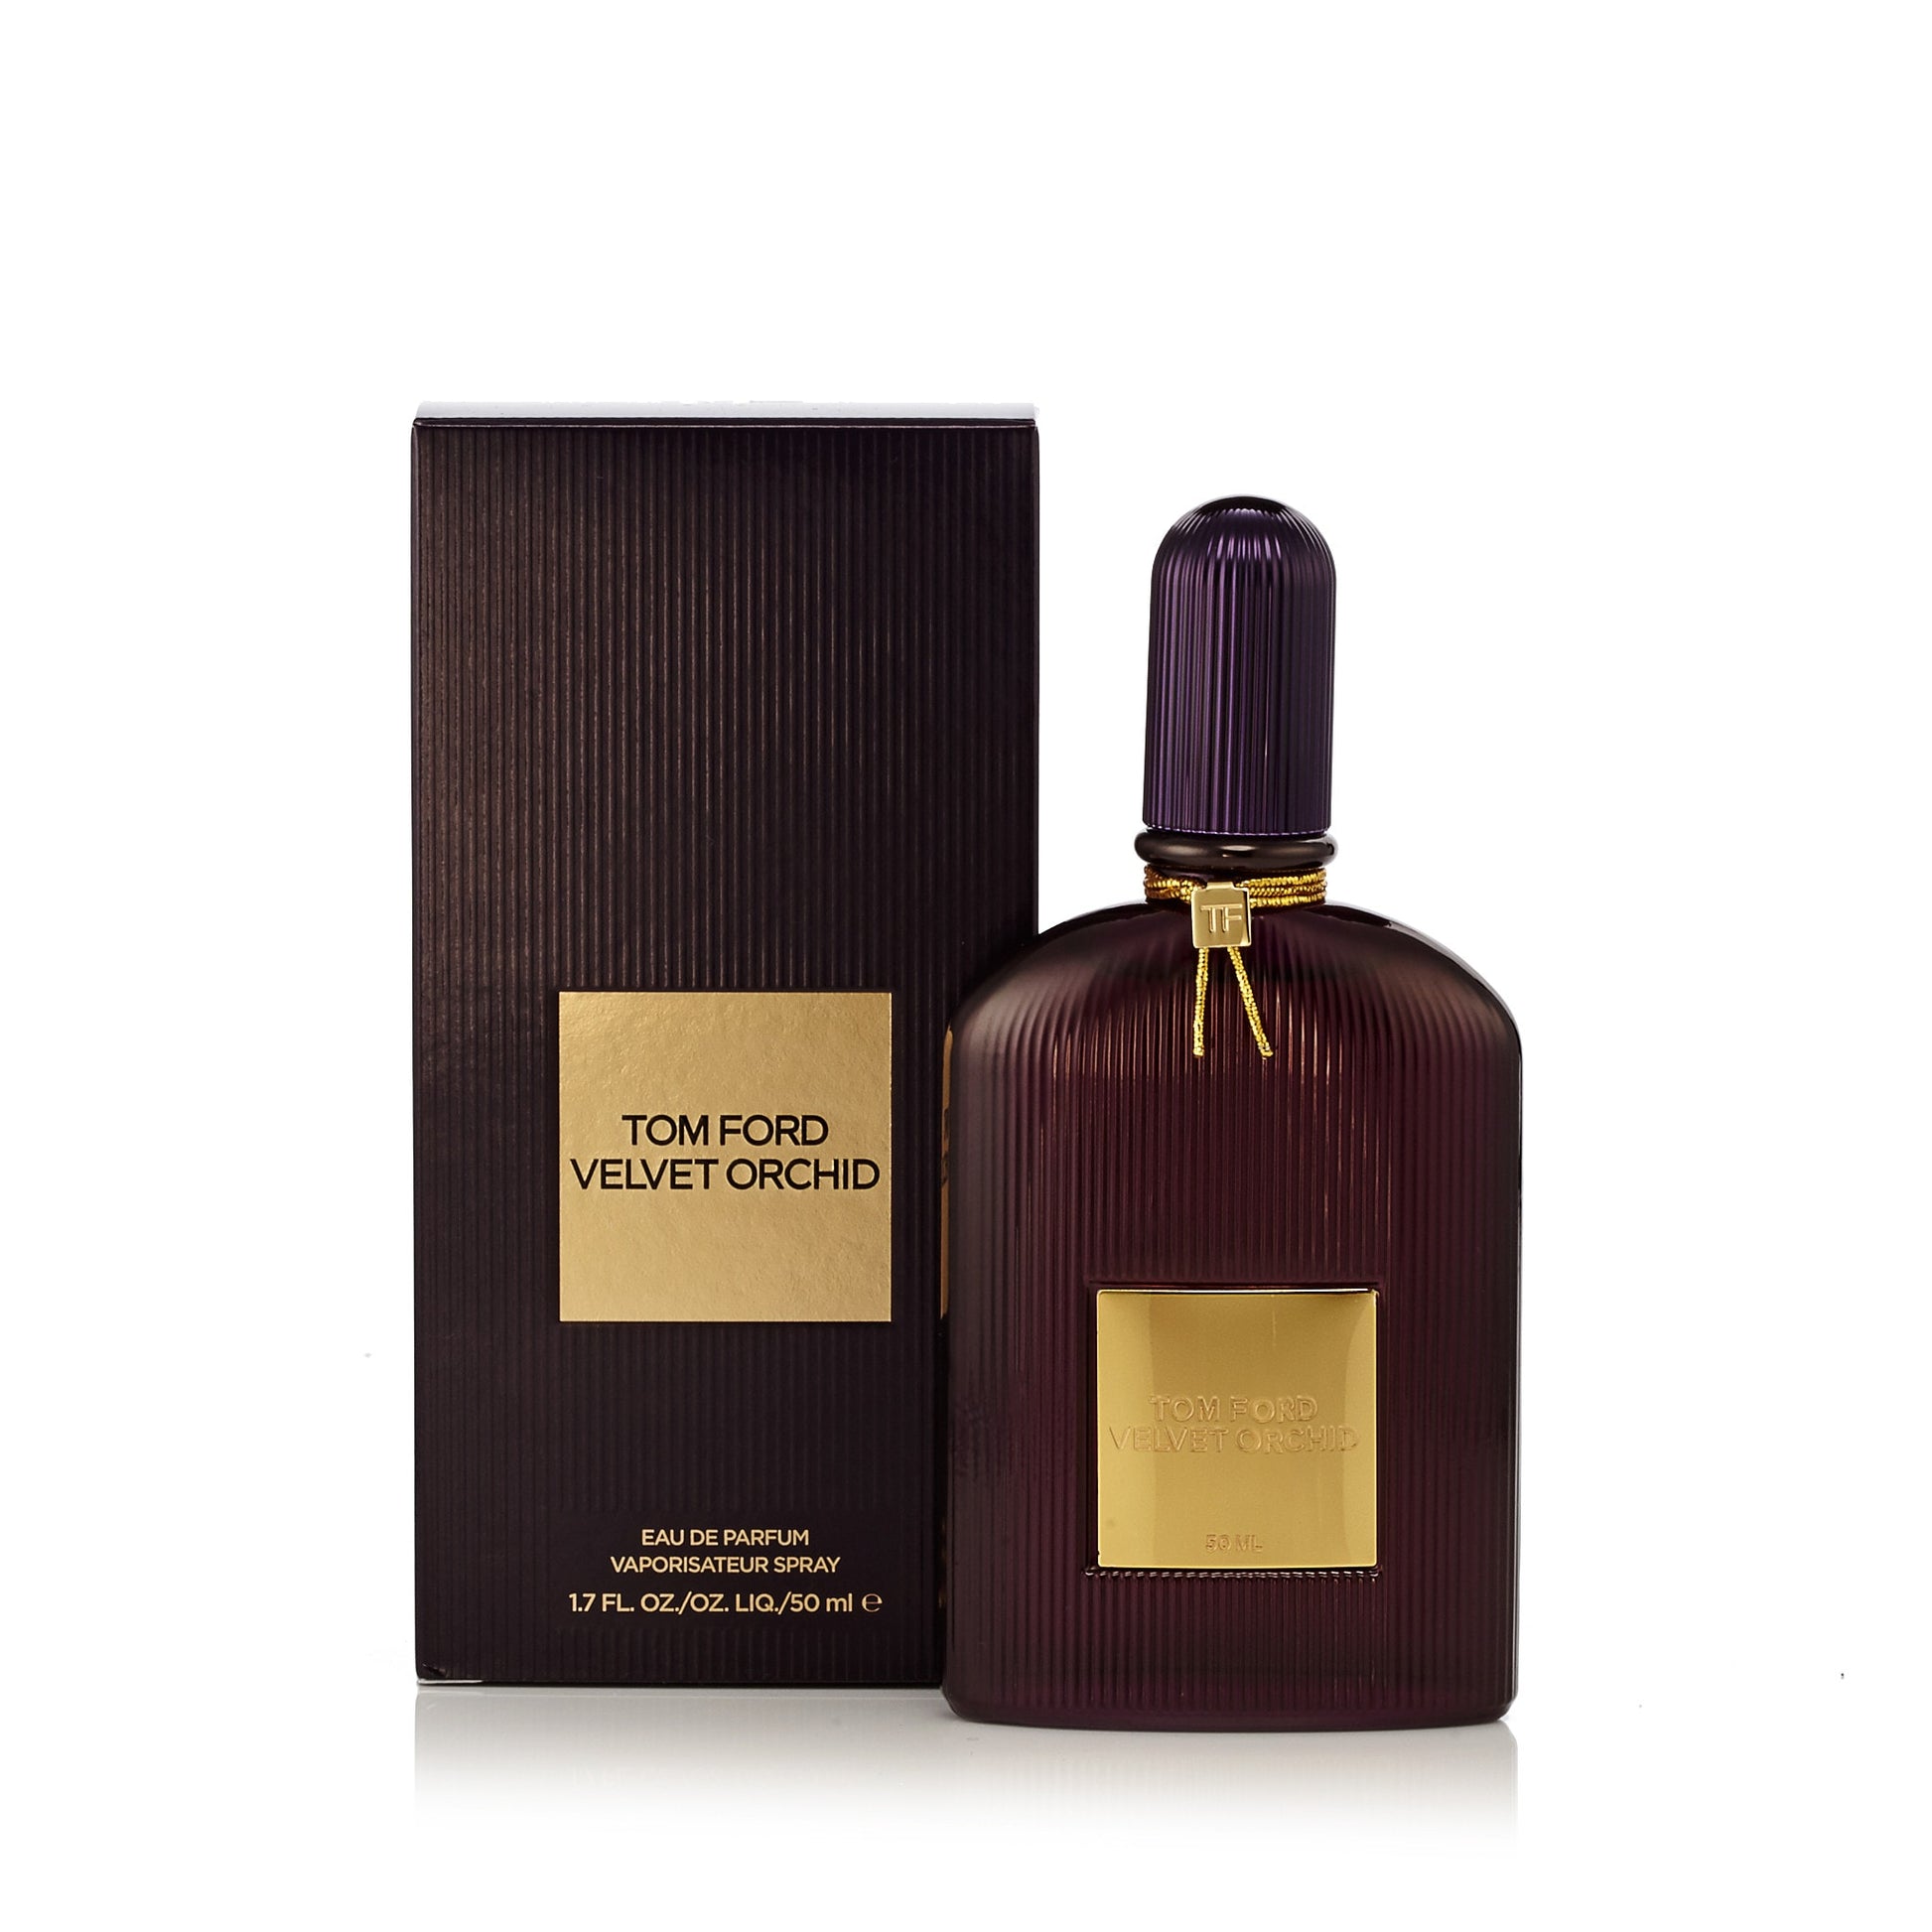 Tom ford orchid мужские. Tom Ford Velvet Orchid. Tom Ford Black Orchid Parfum. Tom Ford Velvet Orchid мужские. Том Форд Velvet Orchid мужской.